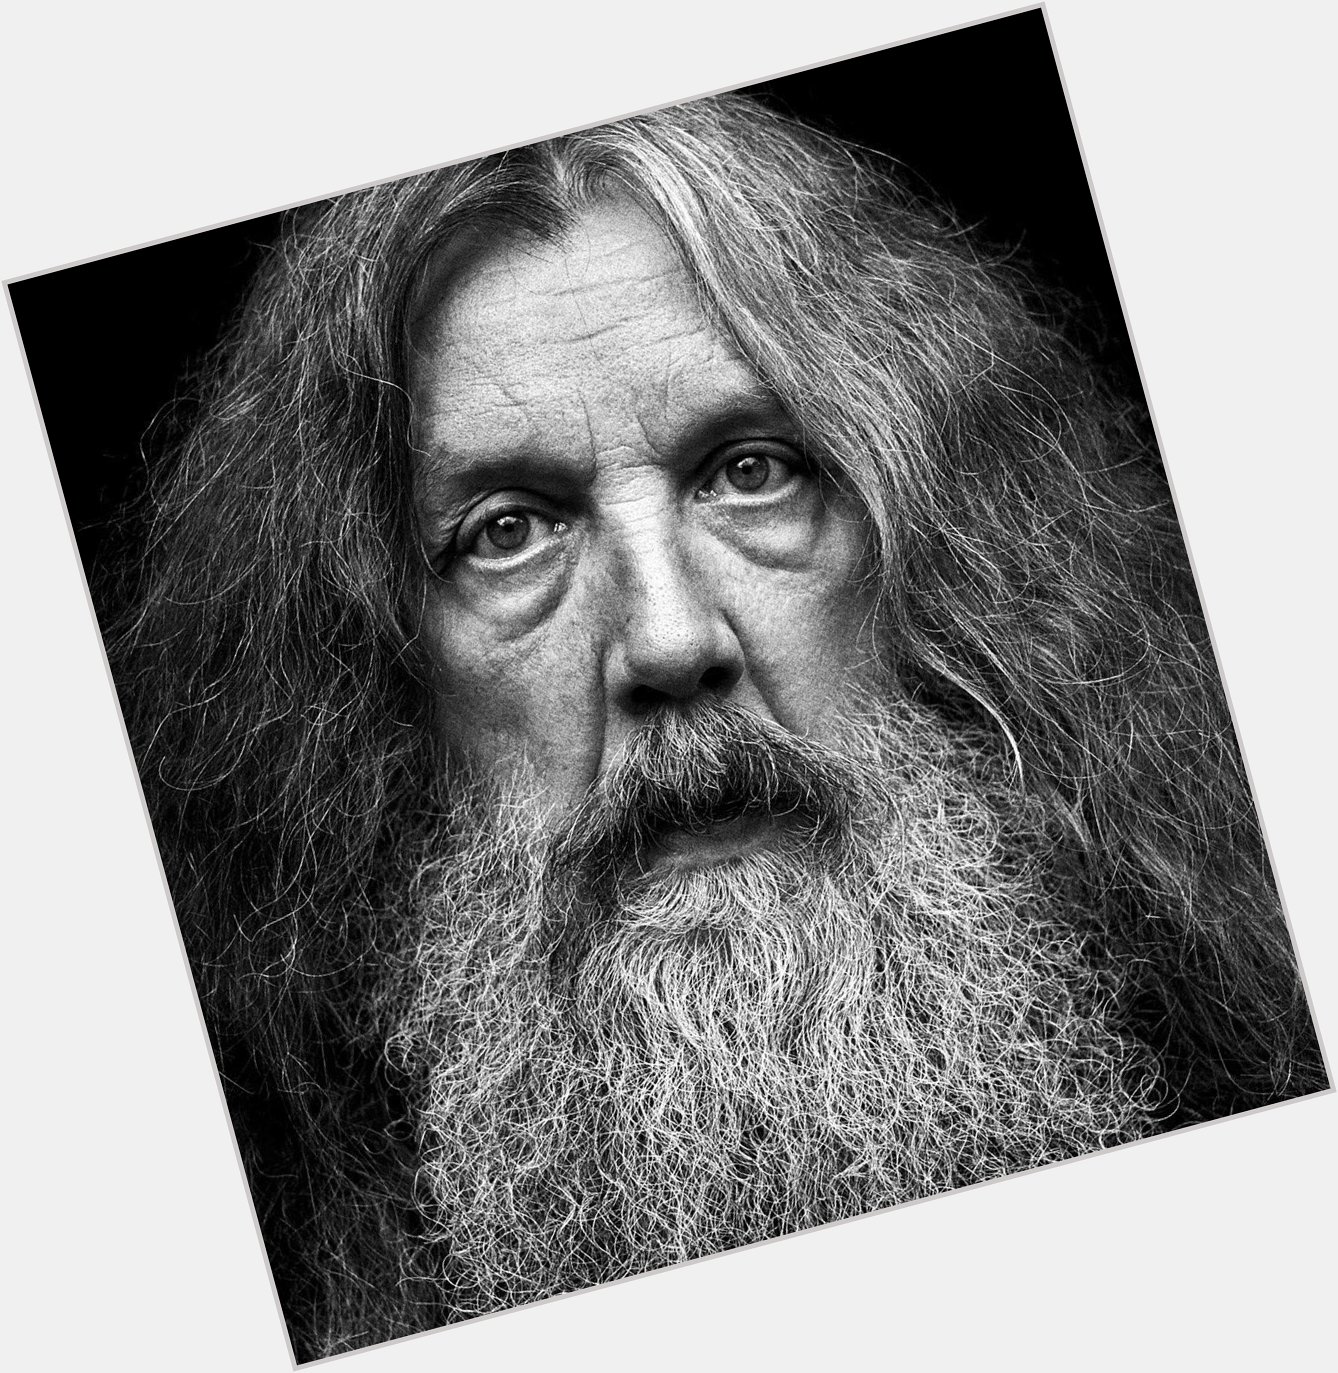 Happy Birthday to the great Alan Moore, without whom this world would be a much less interesting place. 